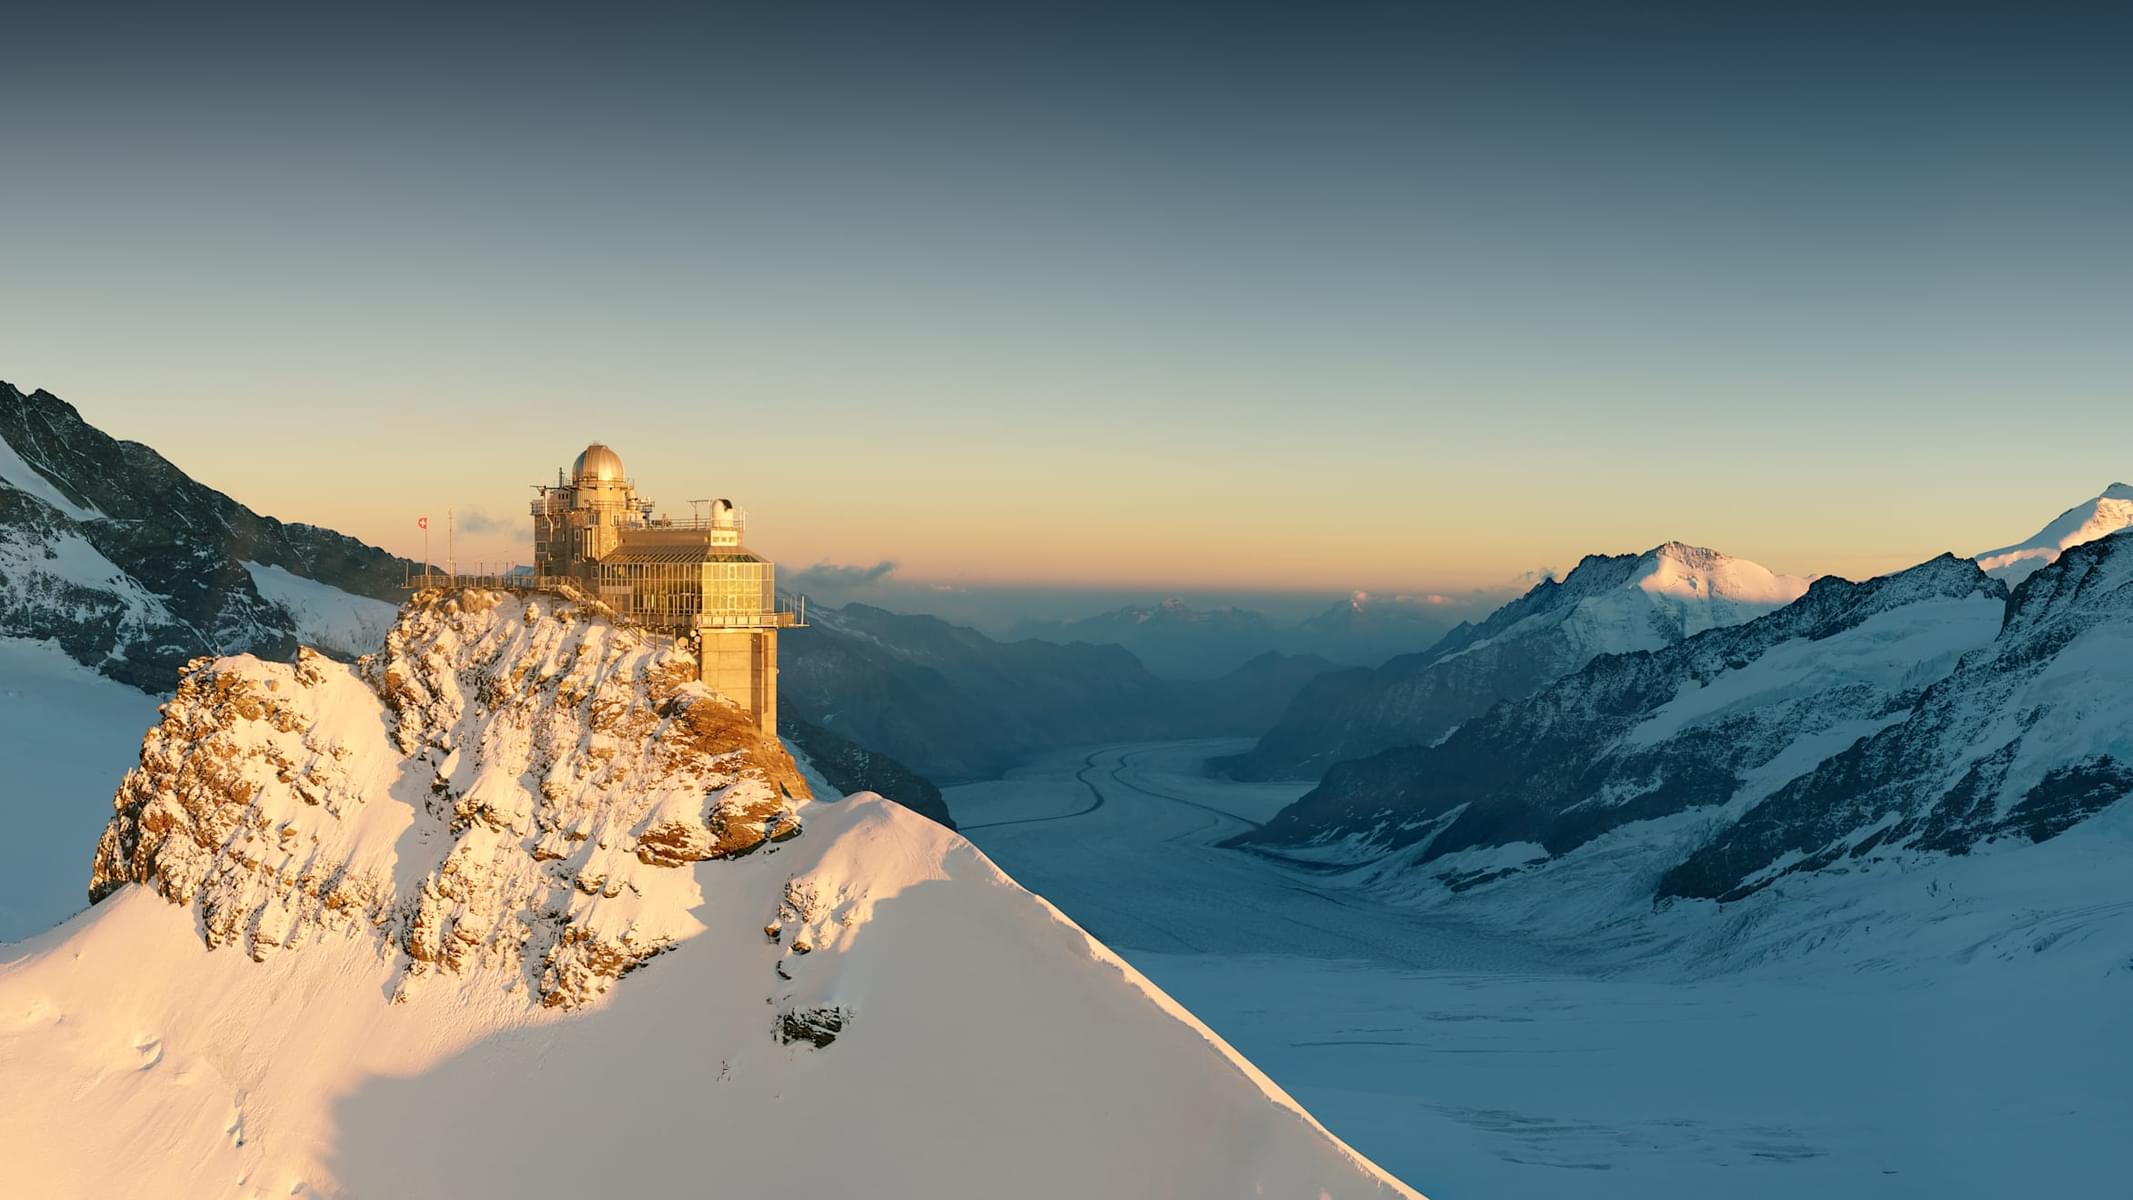 Admire the scenic views of snow-capped peaks from the Sphinx Observation deck